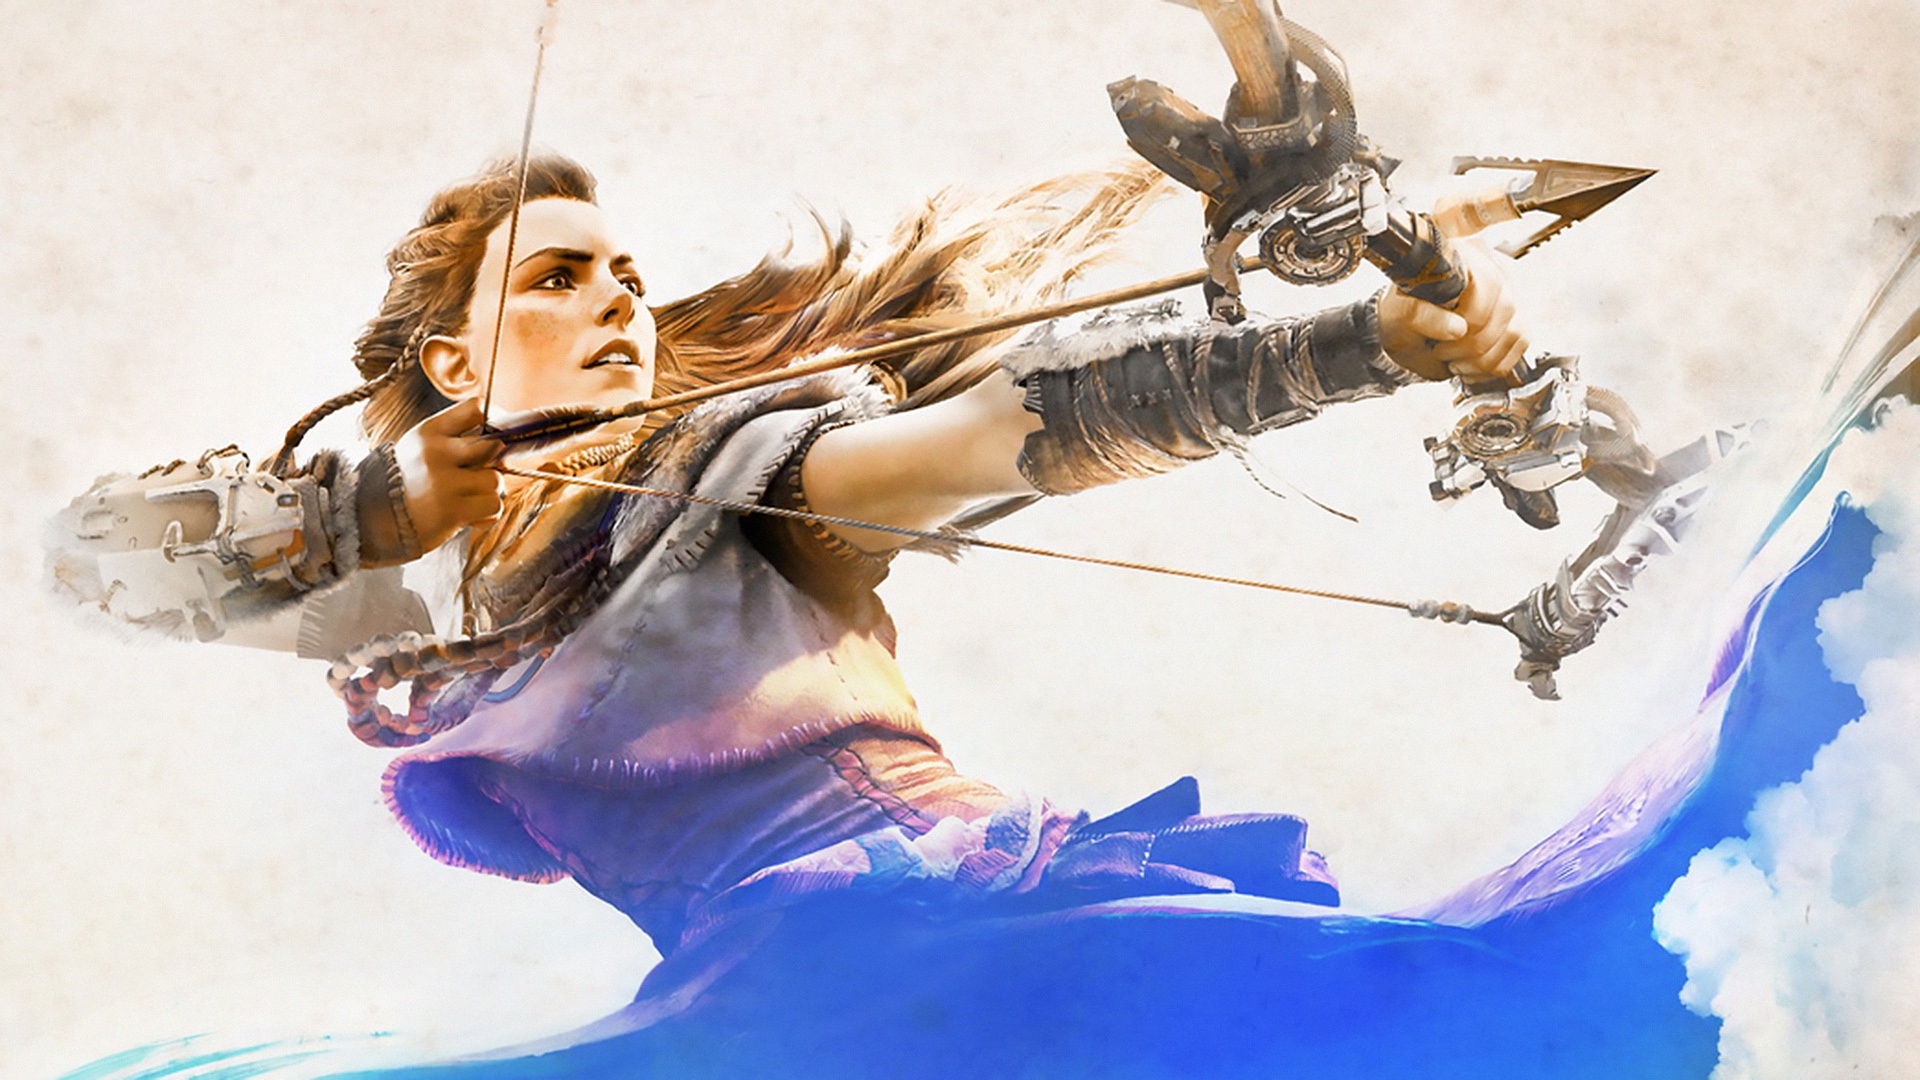 General 1920x1080 video games Horizon: Zero Dawn Aloy protagonist video game girls video game characters bow and arrow white background aiming girls with guns long hair